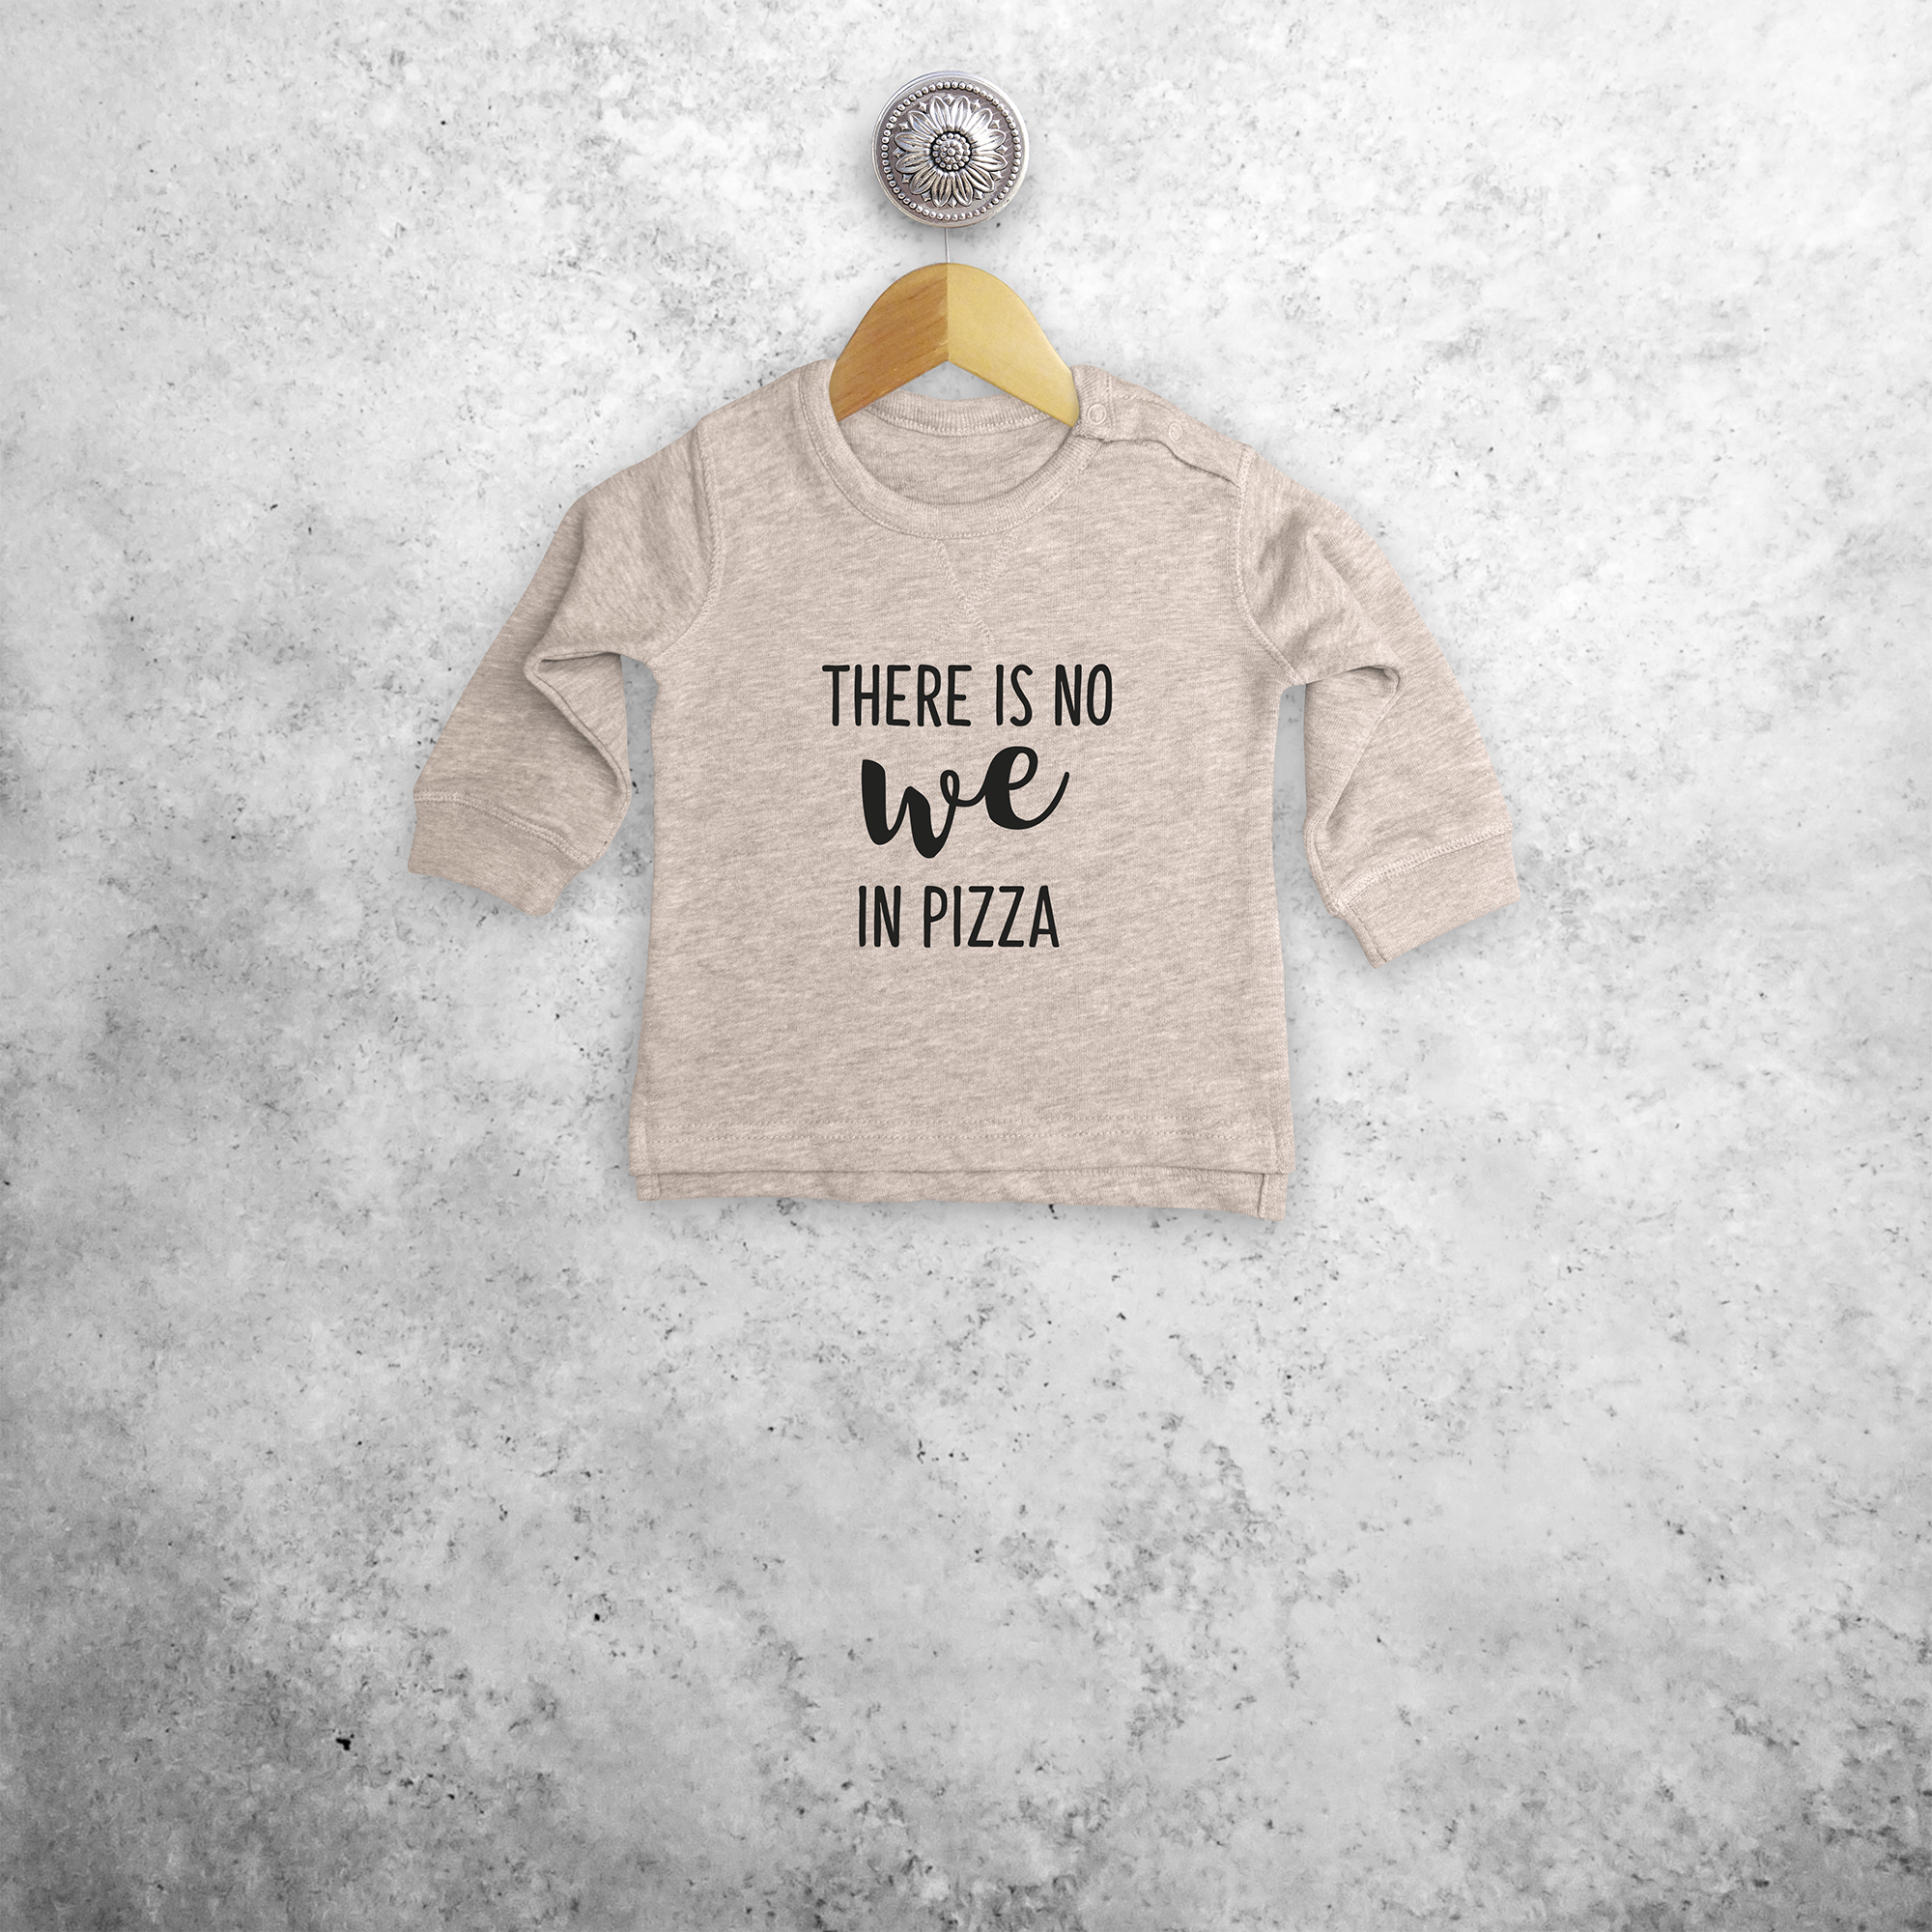 'There is no we in pizza' baby sweater